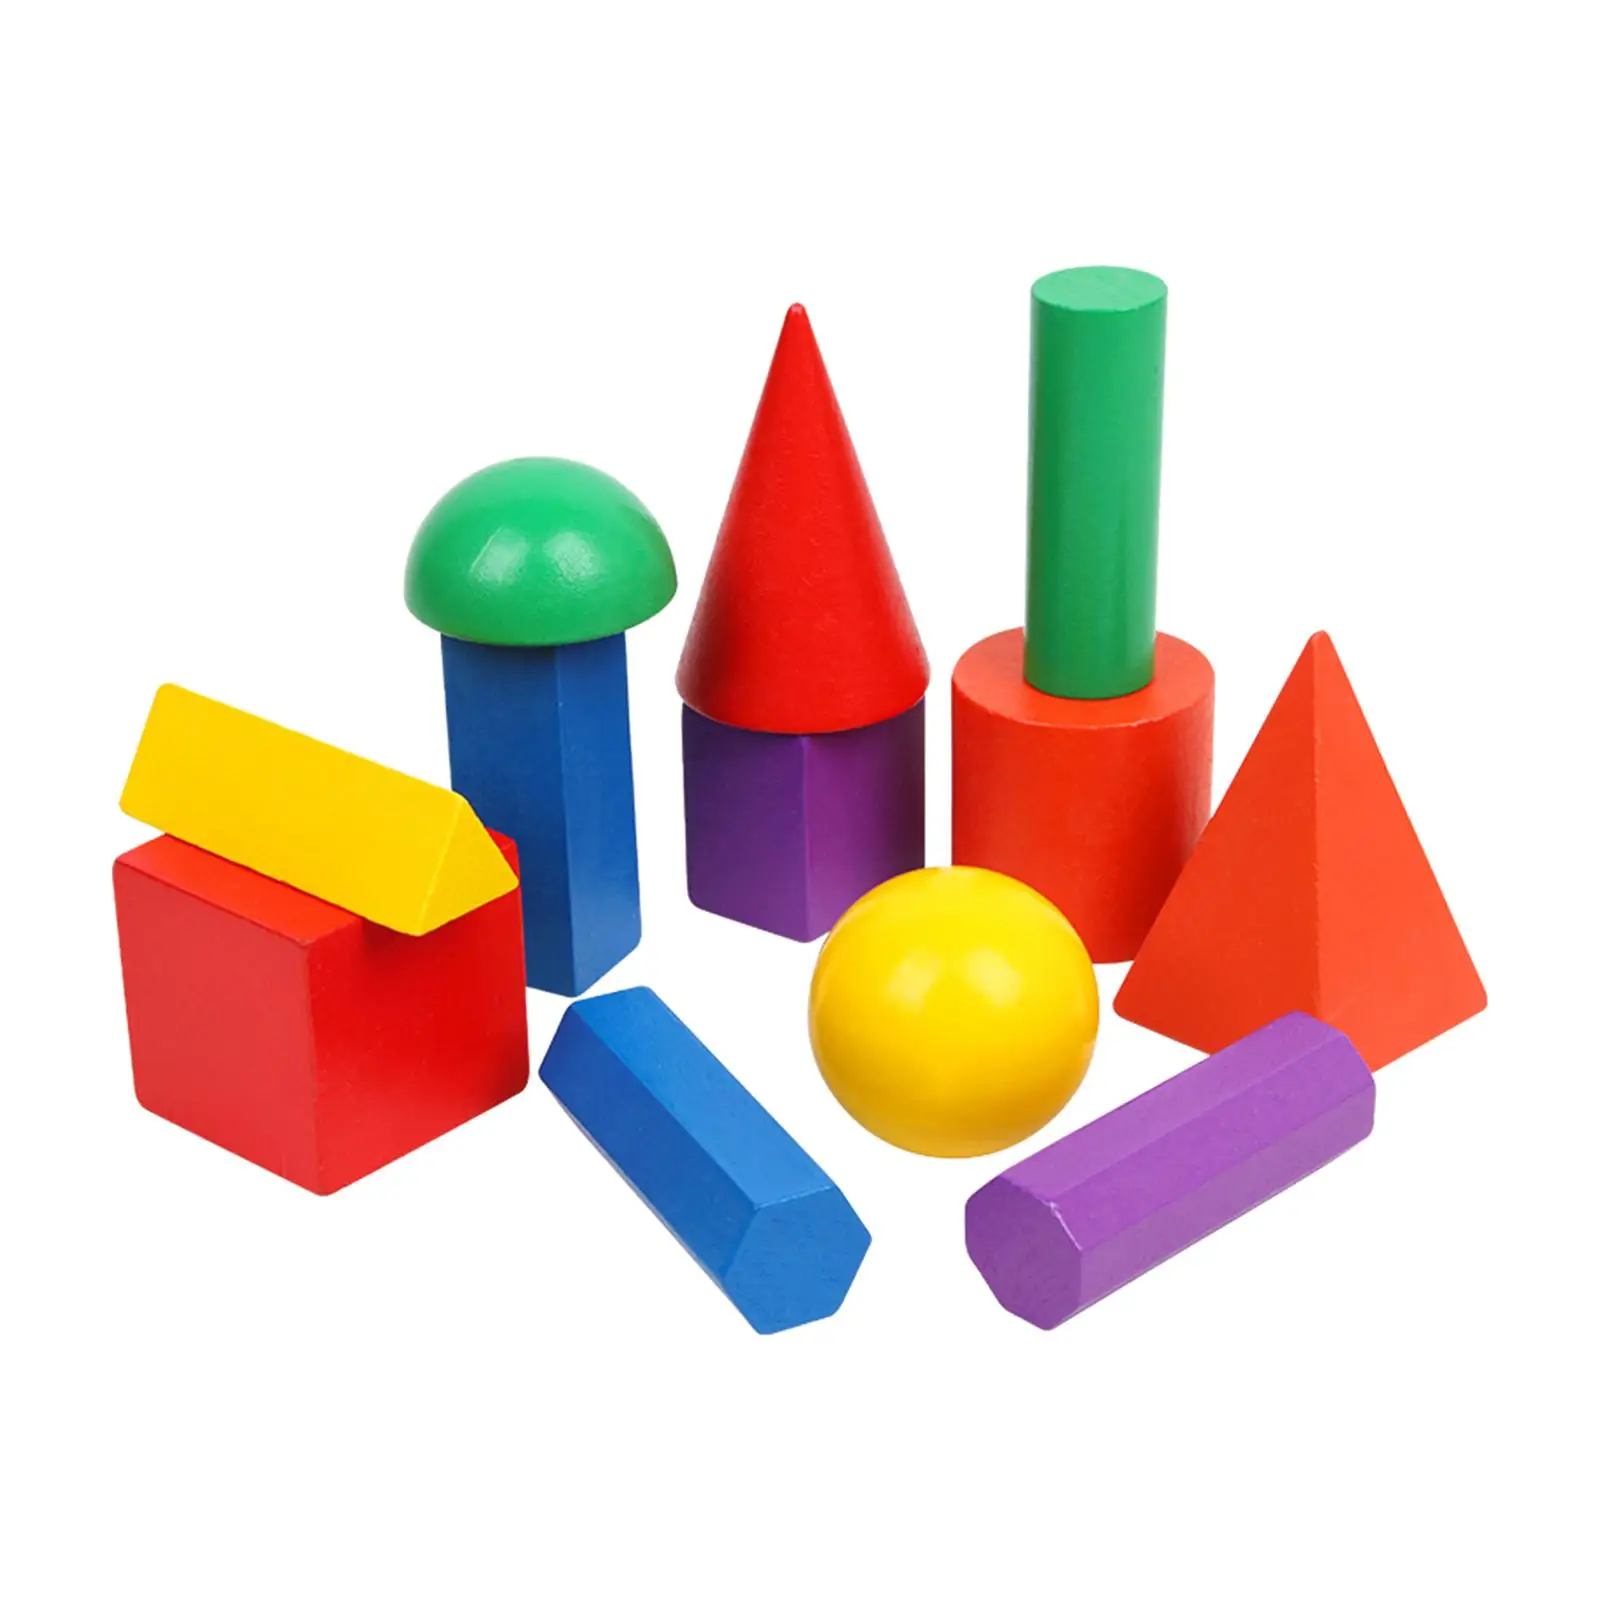 12x Montessori 3D Shapes Geometric Solids Learning Toys Teaching Aids Educational Large Size Pattern Blocks for Preschool Gift